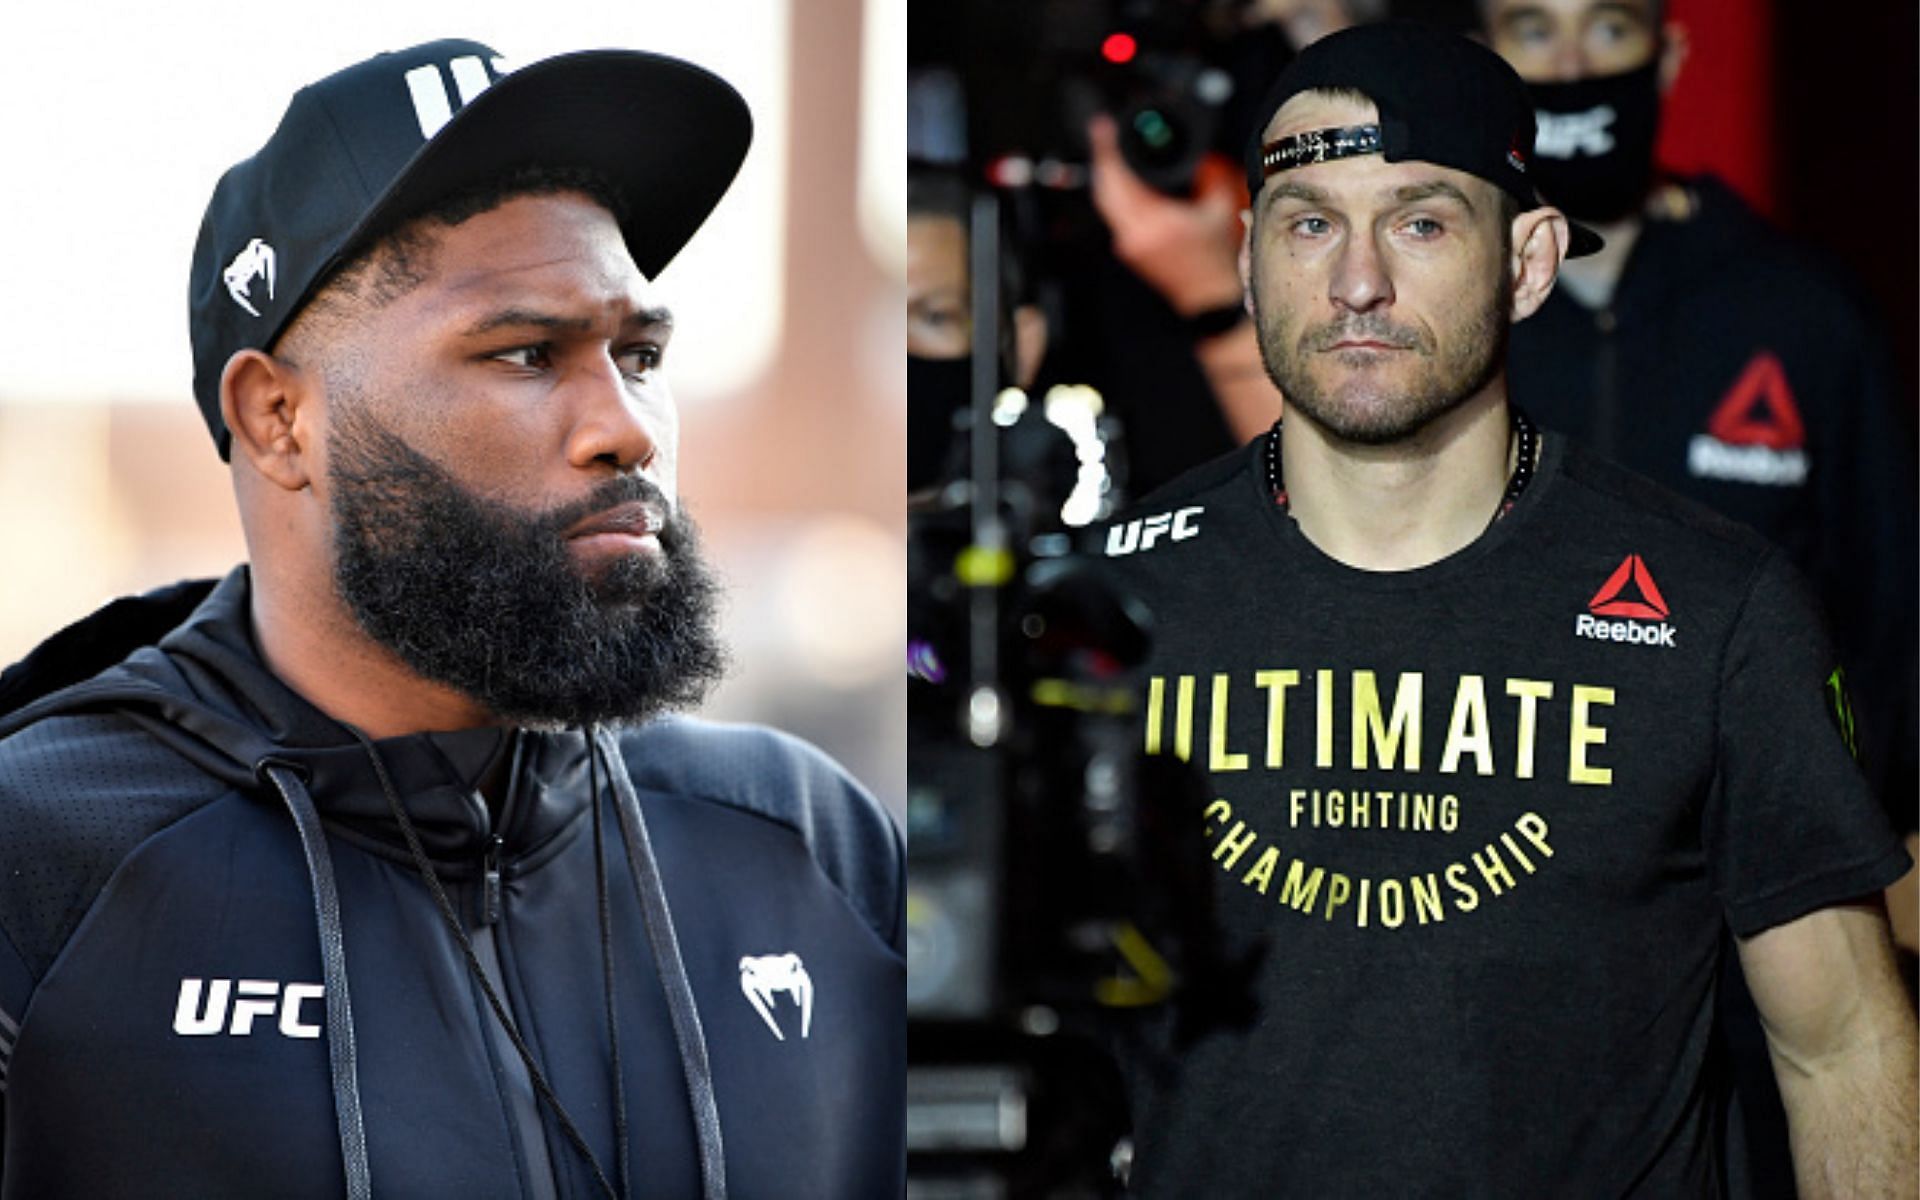 Curtis Blaydes (left) and Stipe Miocic (right) (Images via Getty)